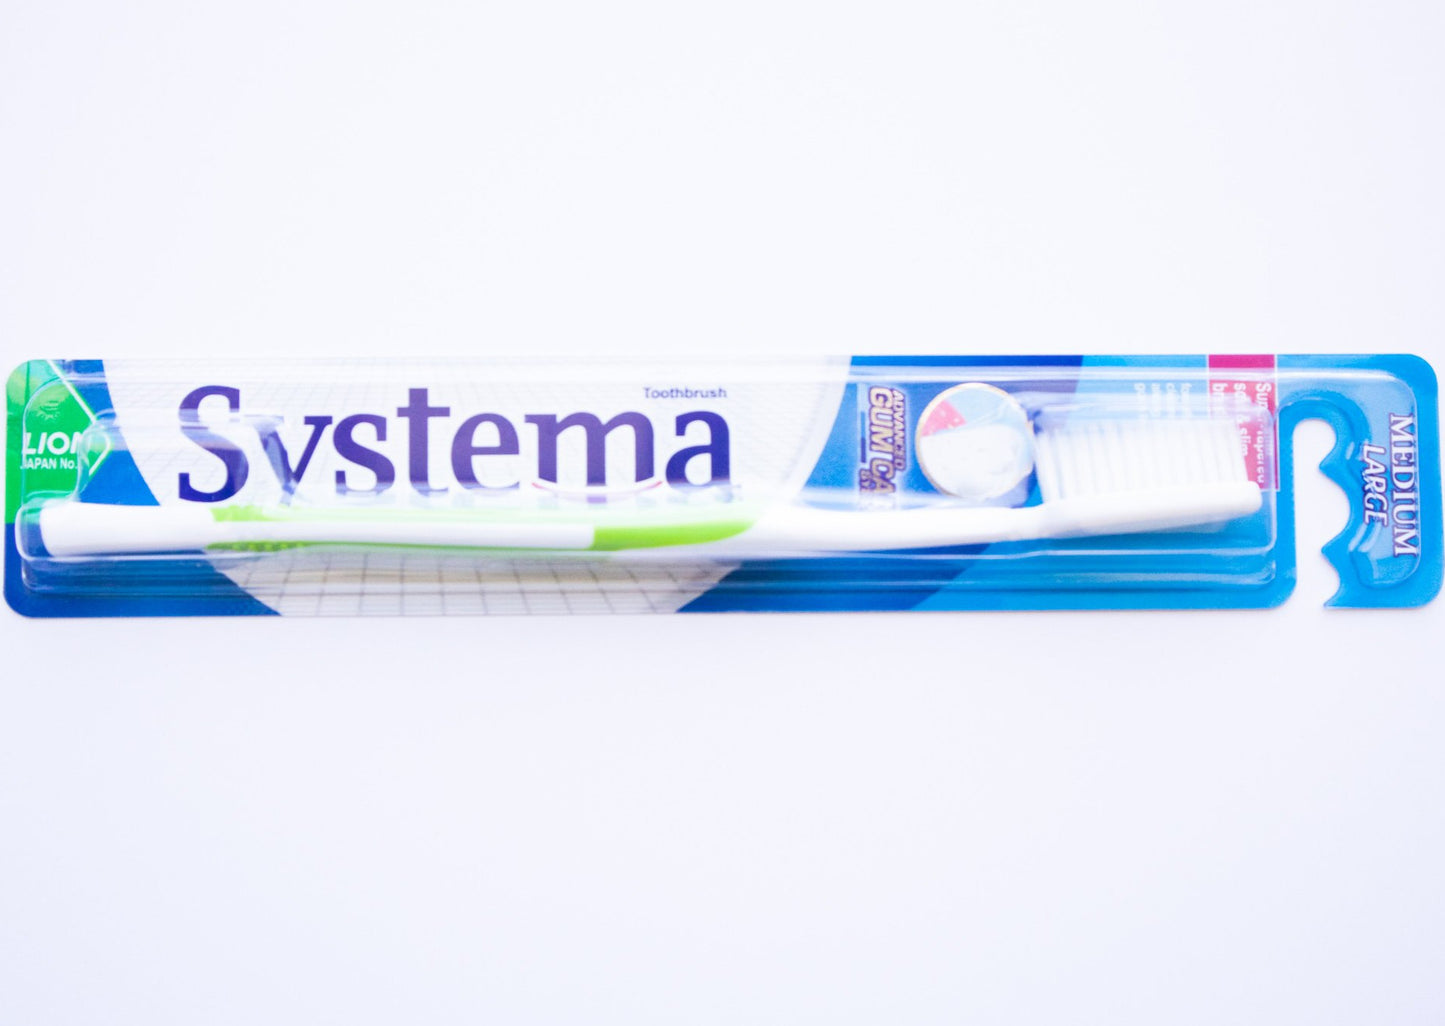 Systema Toothbrush